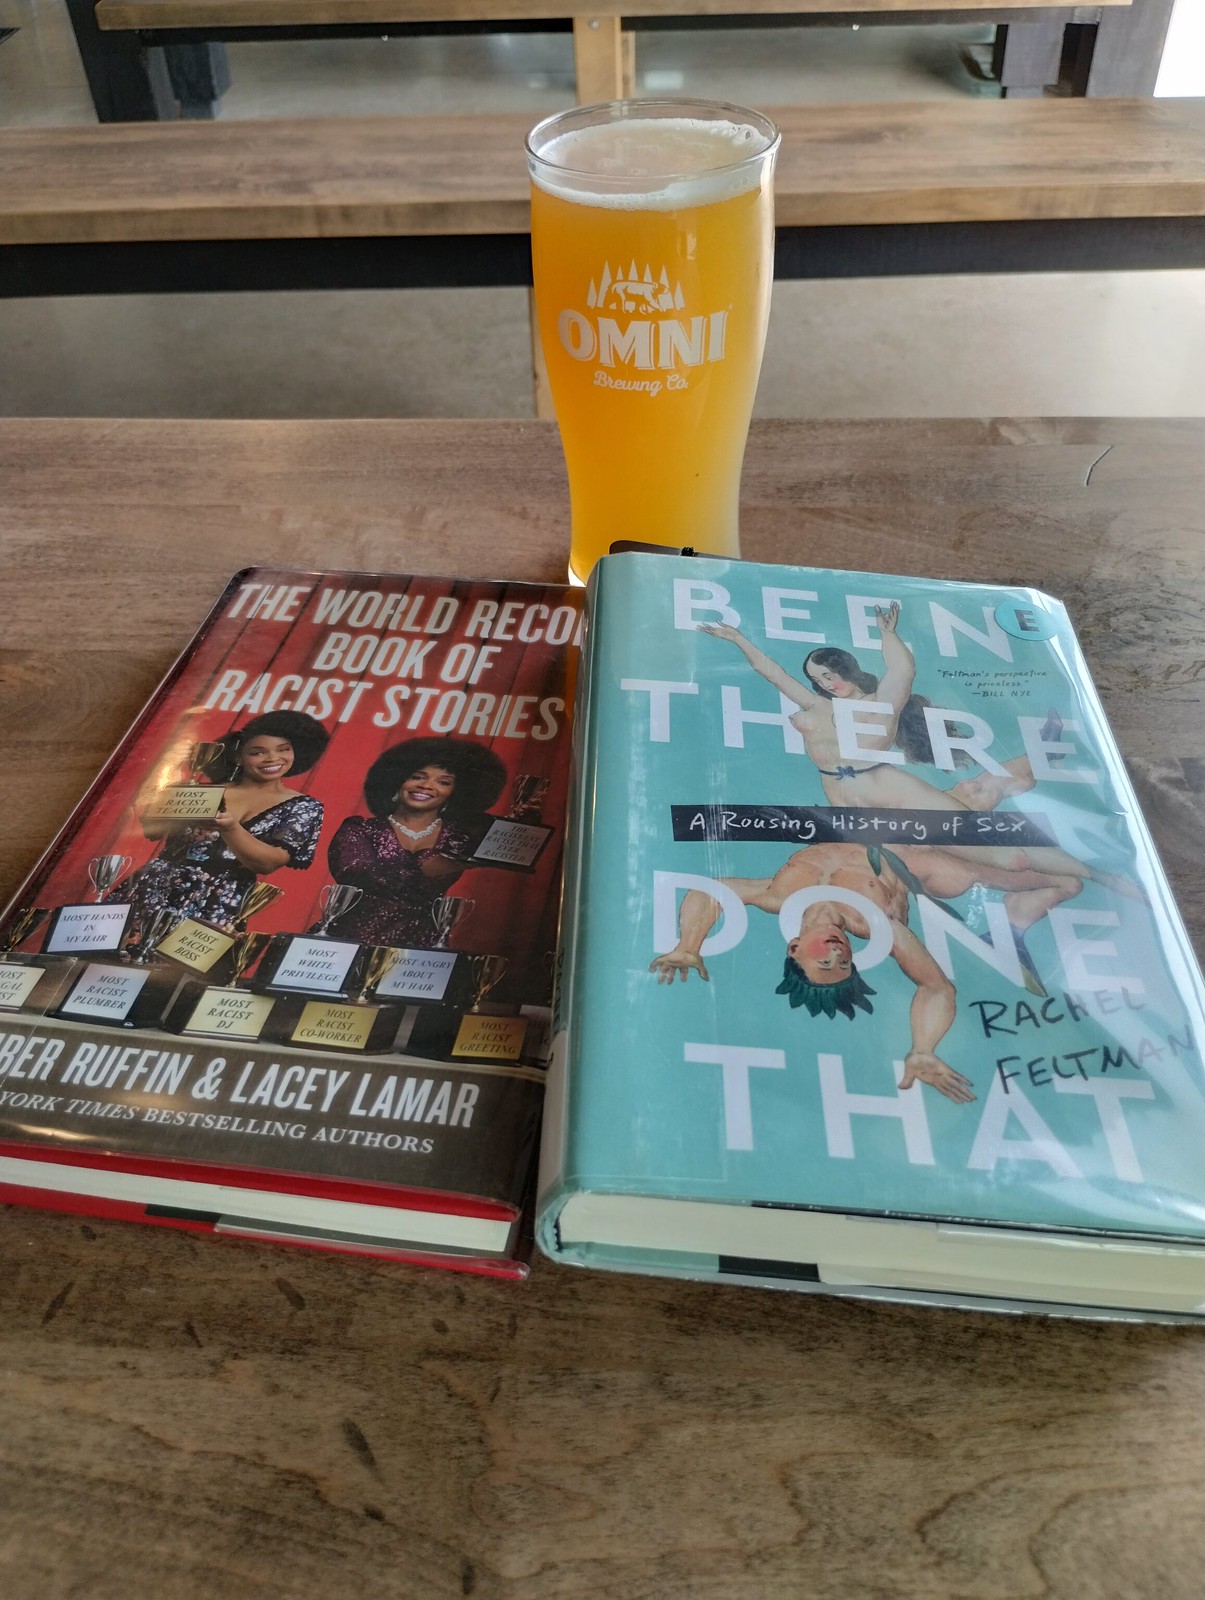 Omni book and beer by: